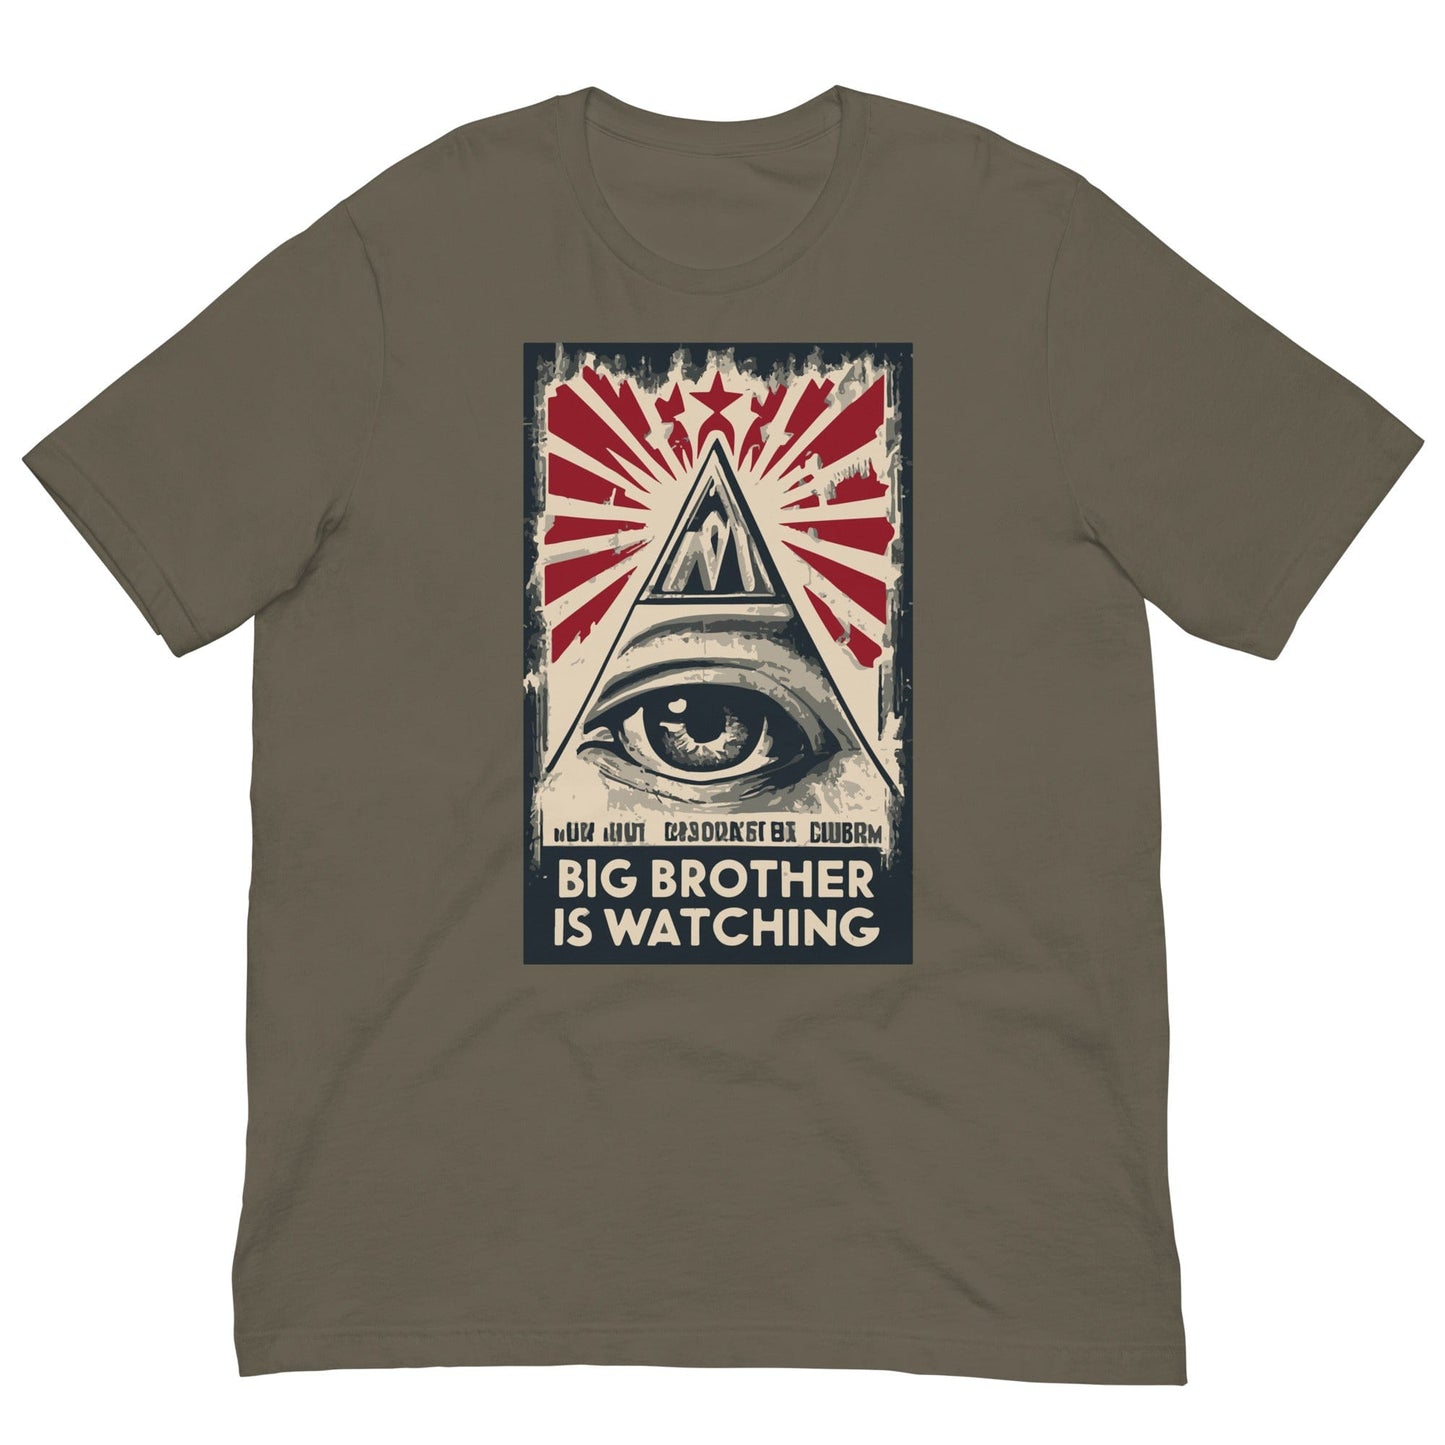 Big Brother is watching T-shirt Army / S